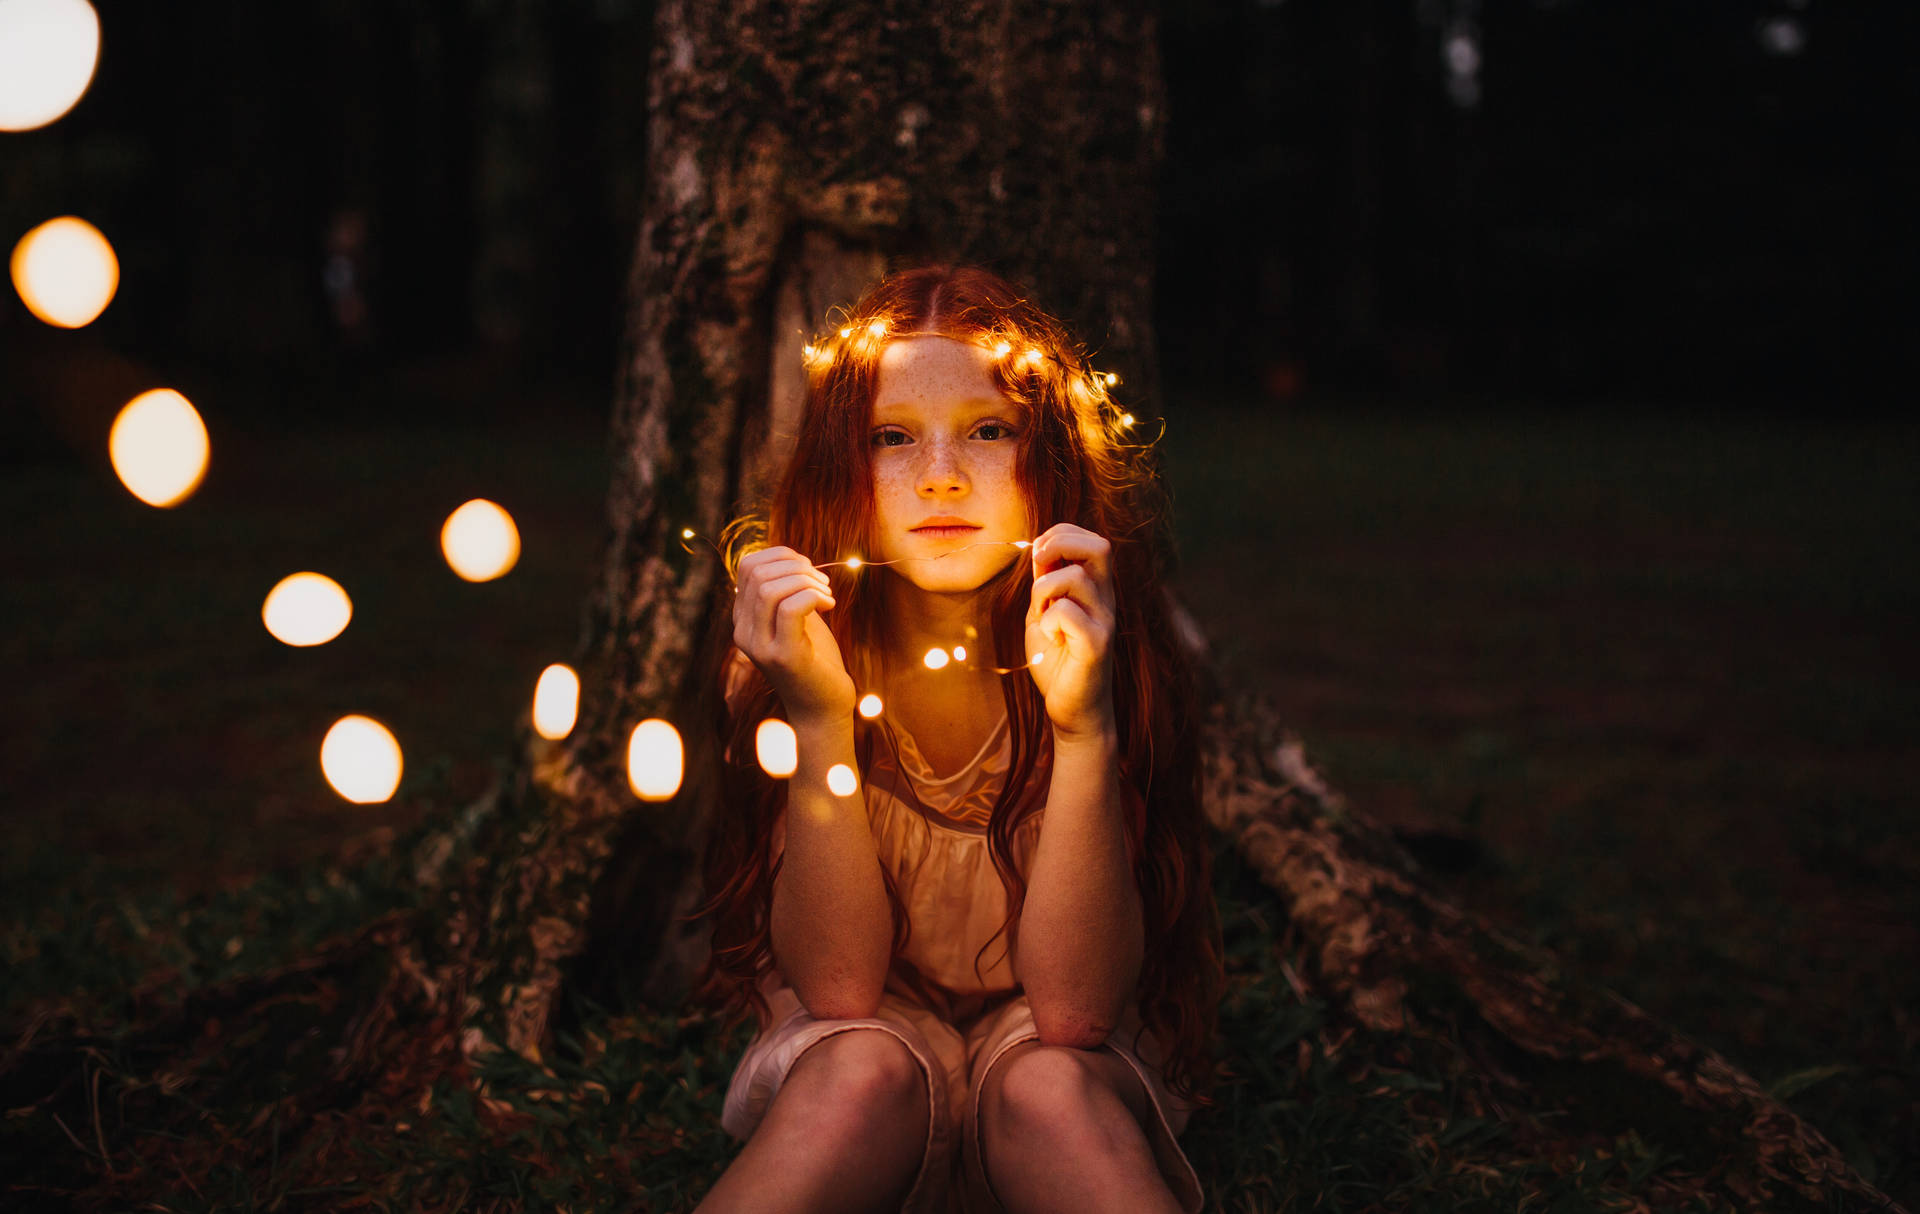 Cute Girl With Light Decorations Background